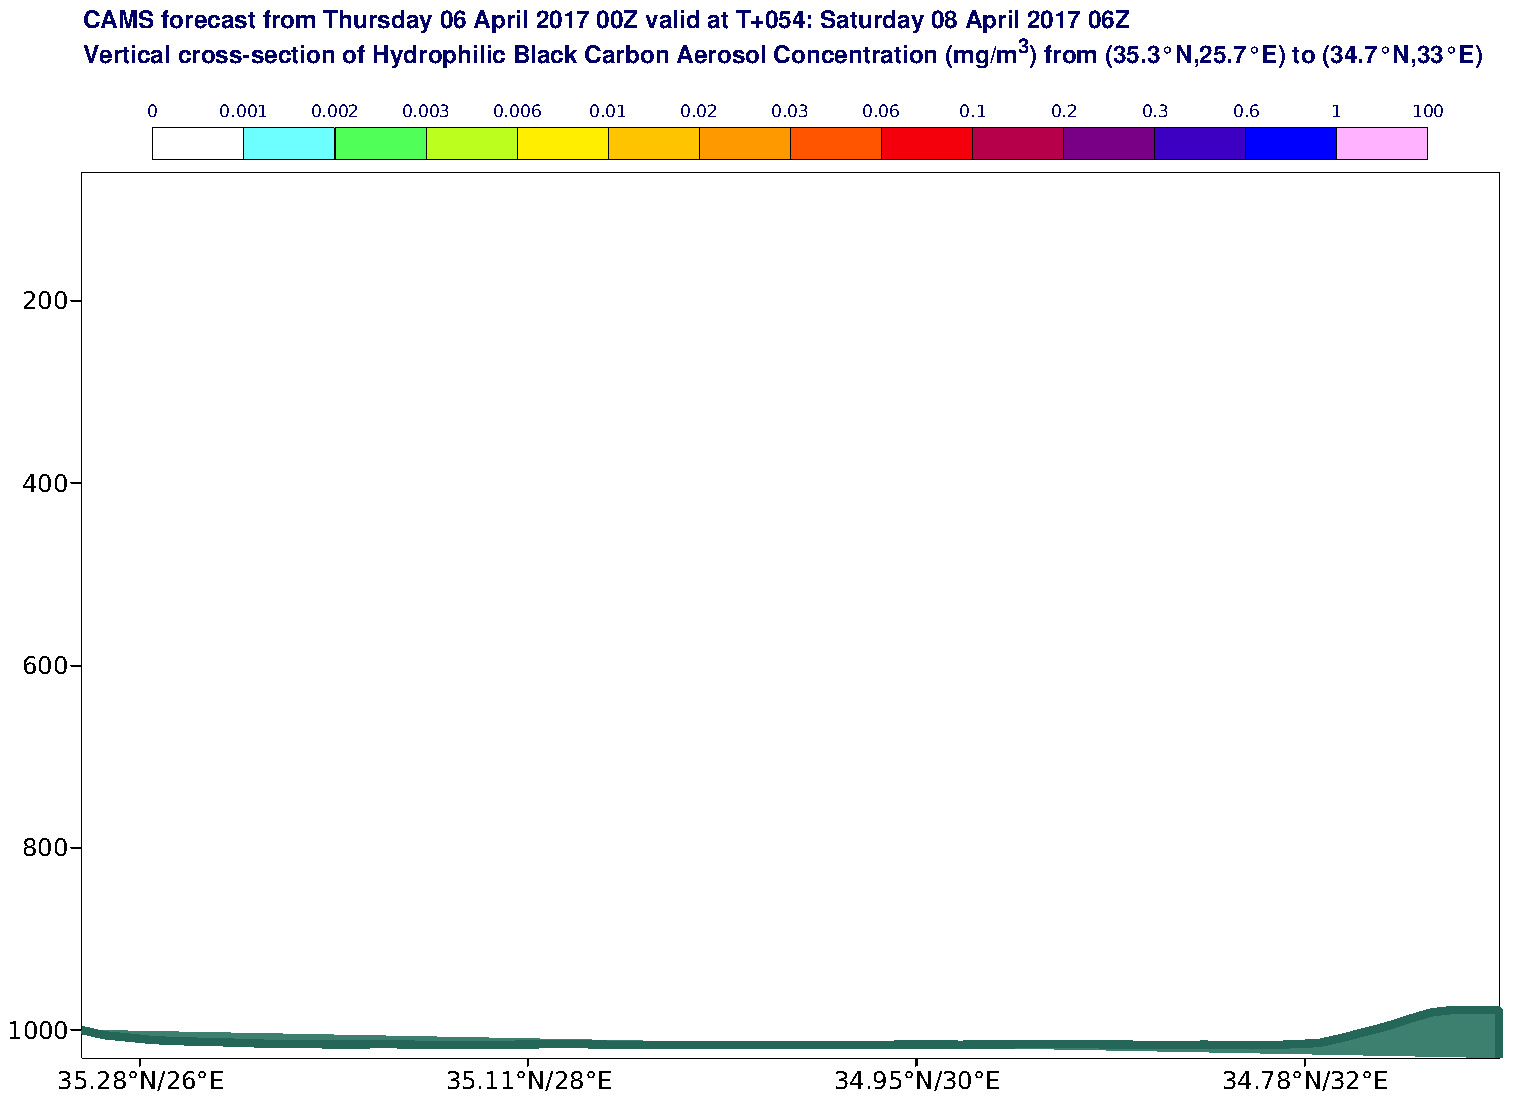 Vertical cross-section of Hydrophilic Black Carbon Aerosol Concentration (mg/m3) valid at T54 - 2017-04-08 06:00